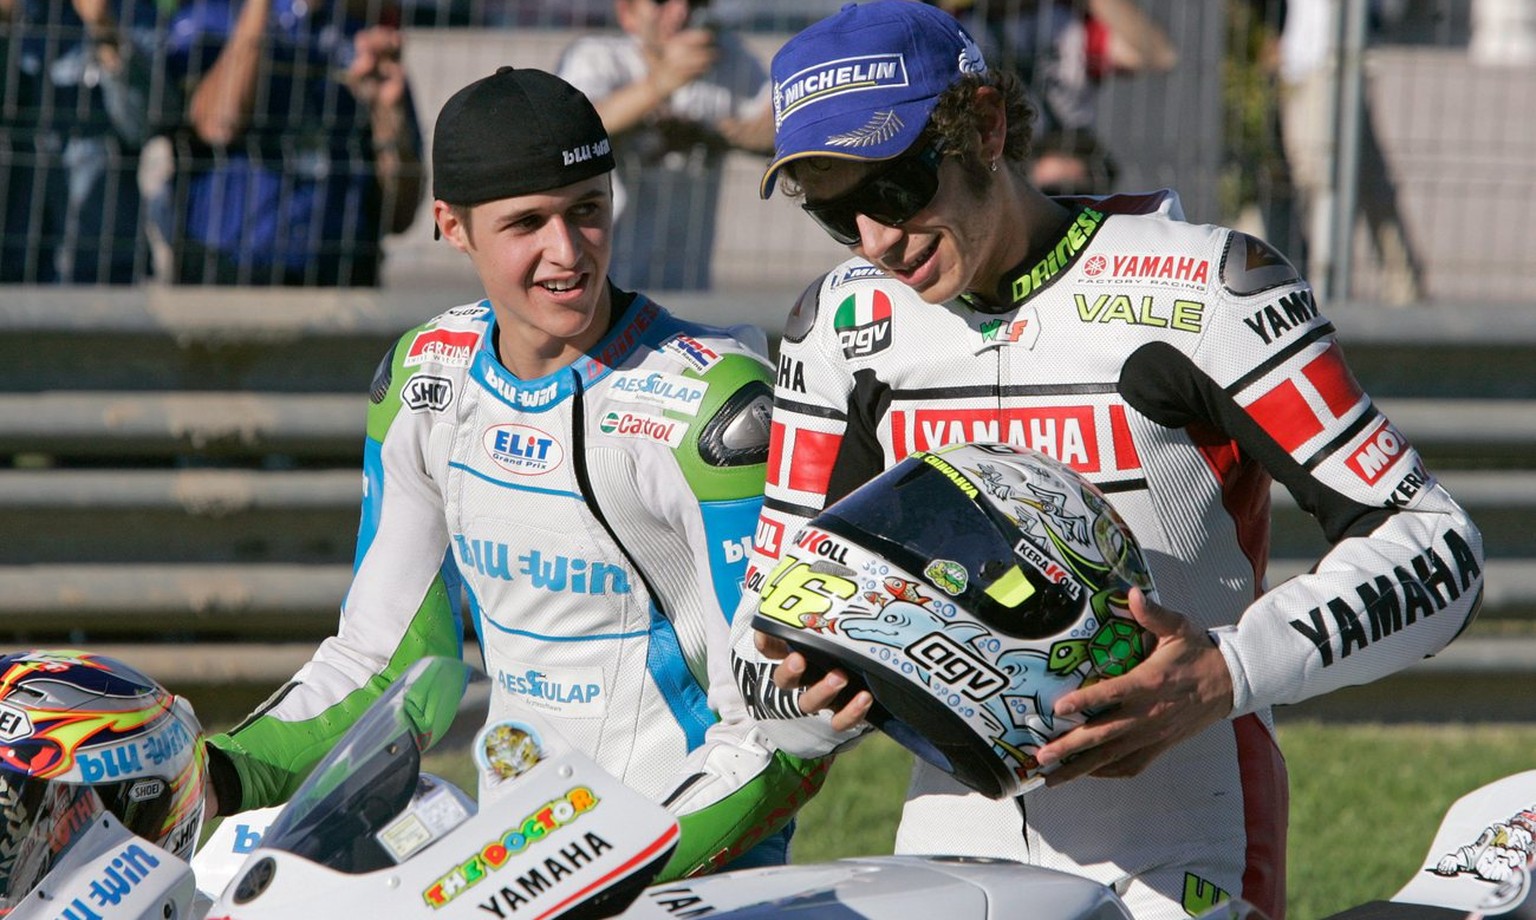 Newly crowned 125cc World Champion, Swiss motorcycle pilot Thomas Luethi, left, and MotoGP World Champion Valentino Rossi from Italy place their helmets onto their bikes for a end of season photo sess ...